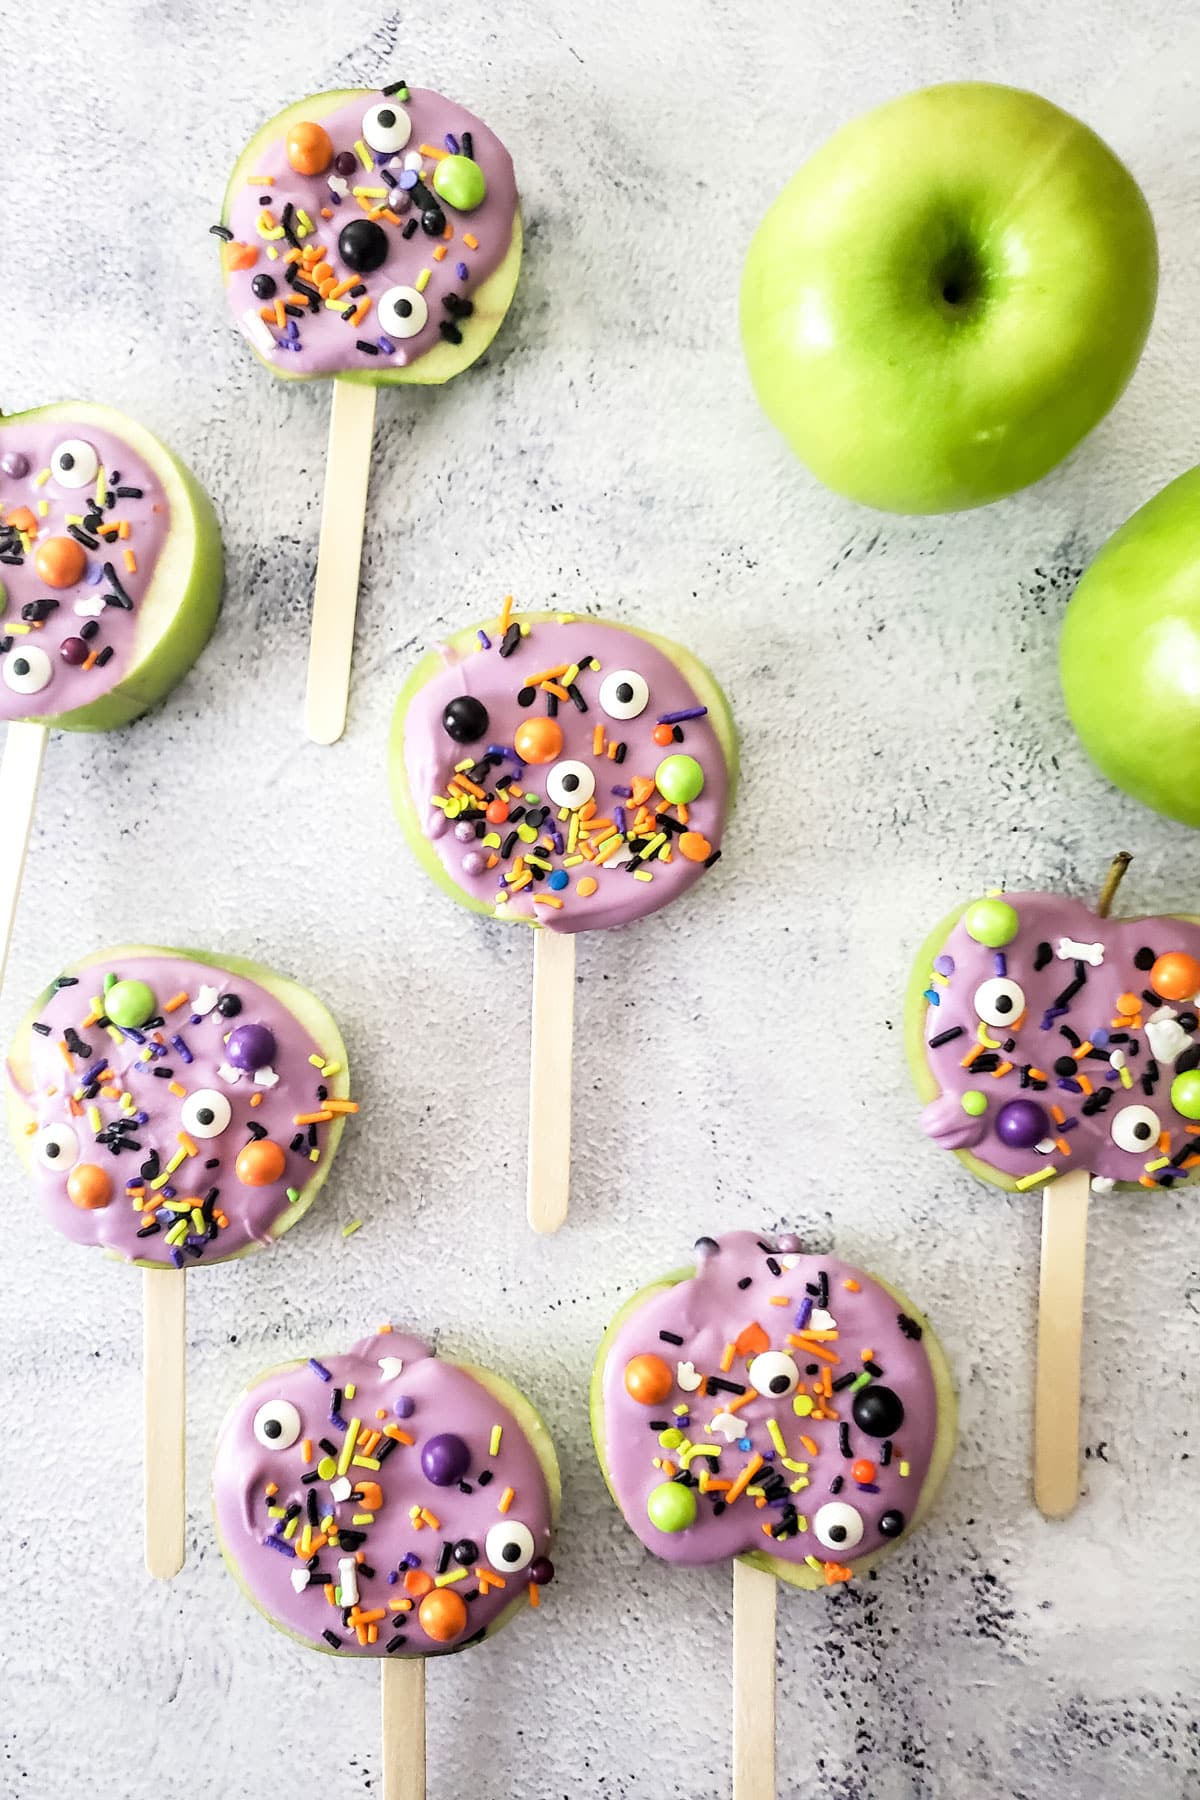 apple slices on popsicle sticks with purple chocolate and Halloween sprinkles